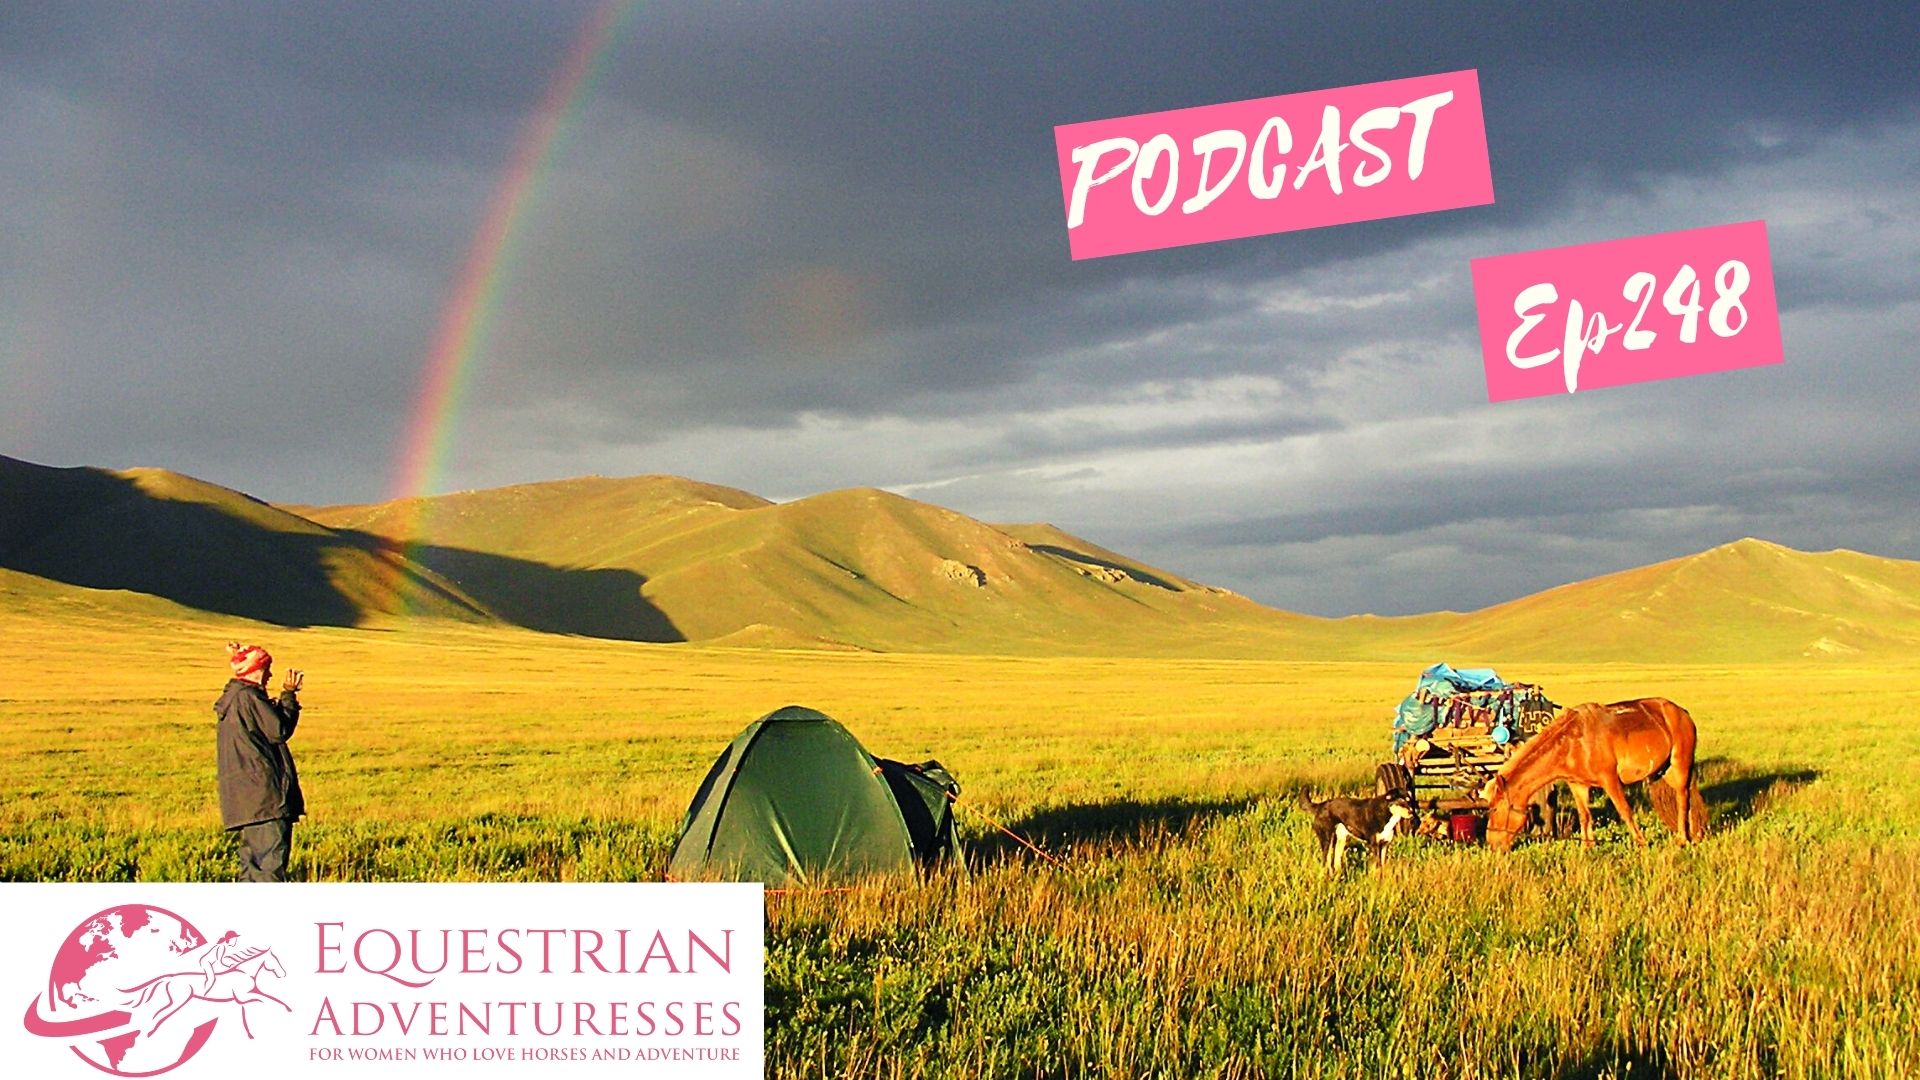 Equestrian Adventuresses Travel and Horse Podcast Ep 248 - Traveling Mongolia by Horse Cart